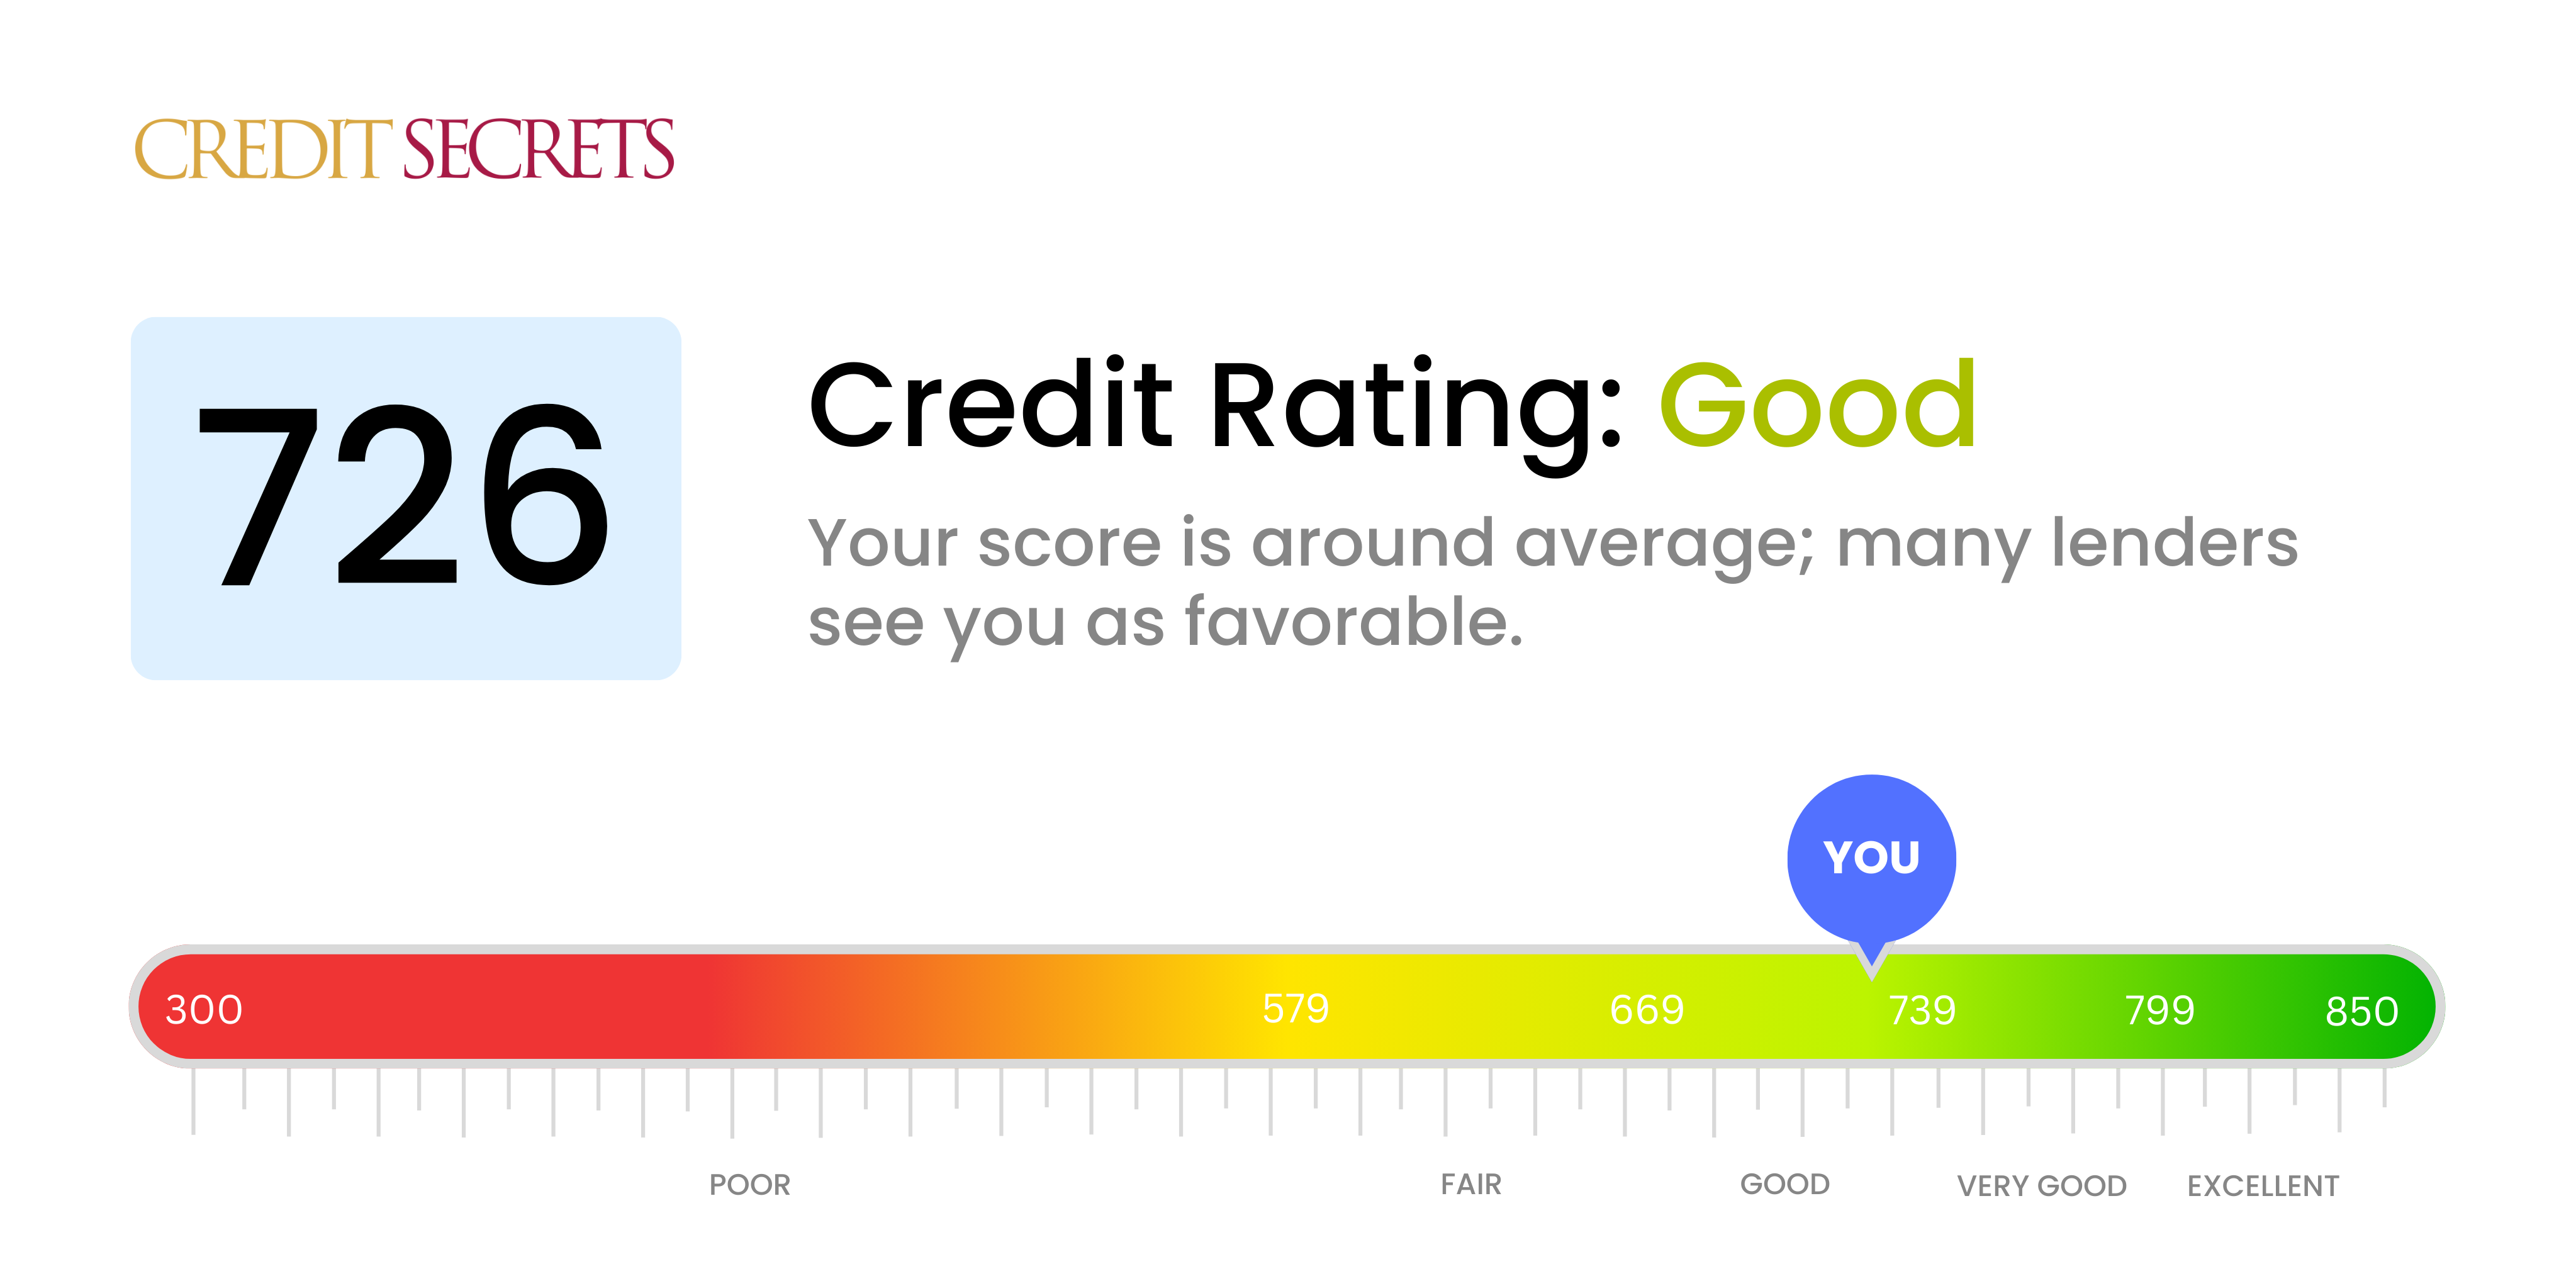 Is 726 a good credit score?